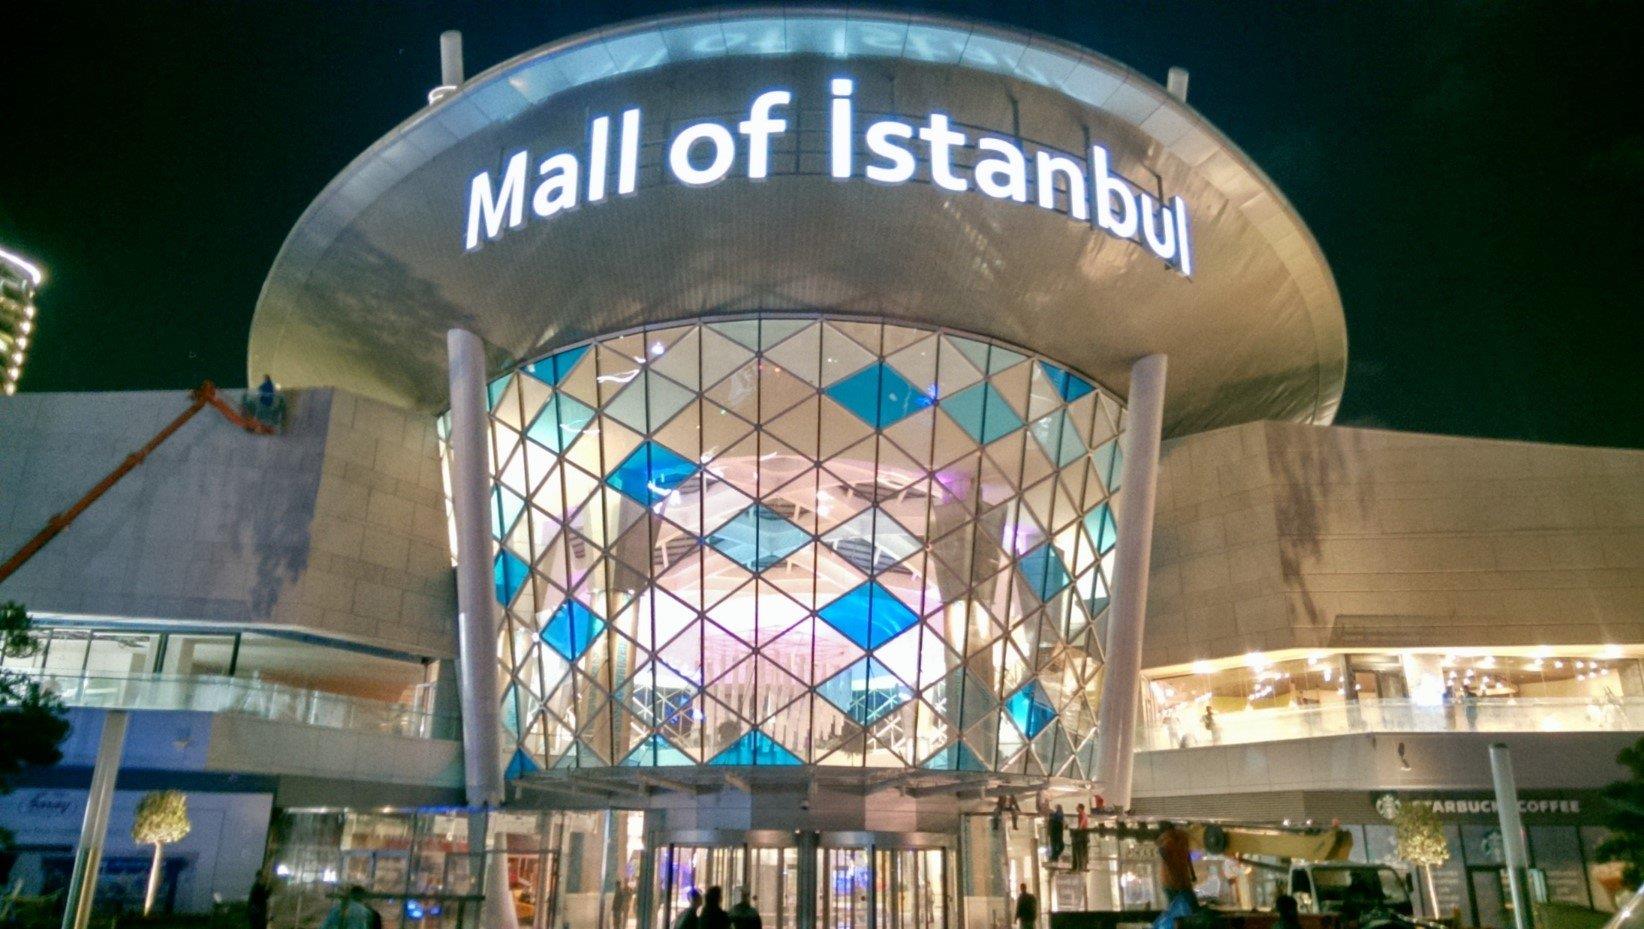 Mall of Istanbul Entrance Facade & Wind Screen